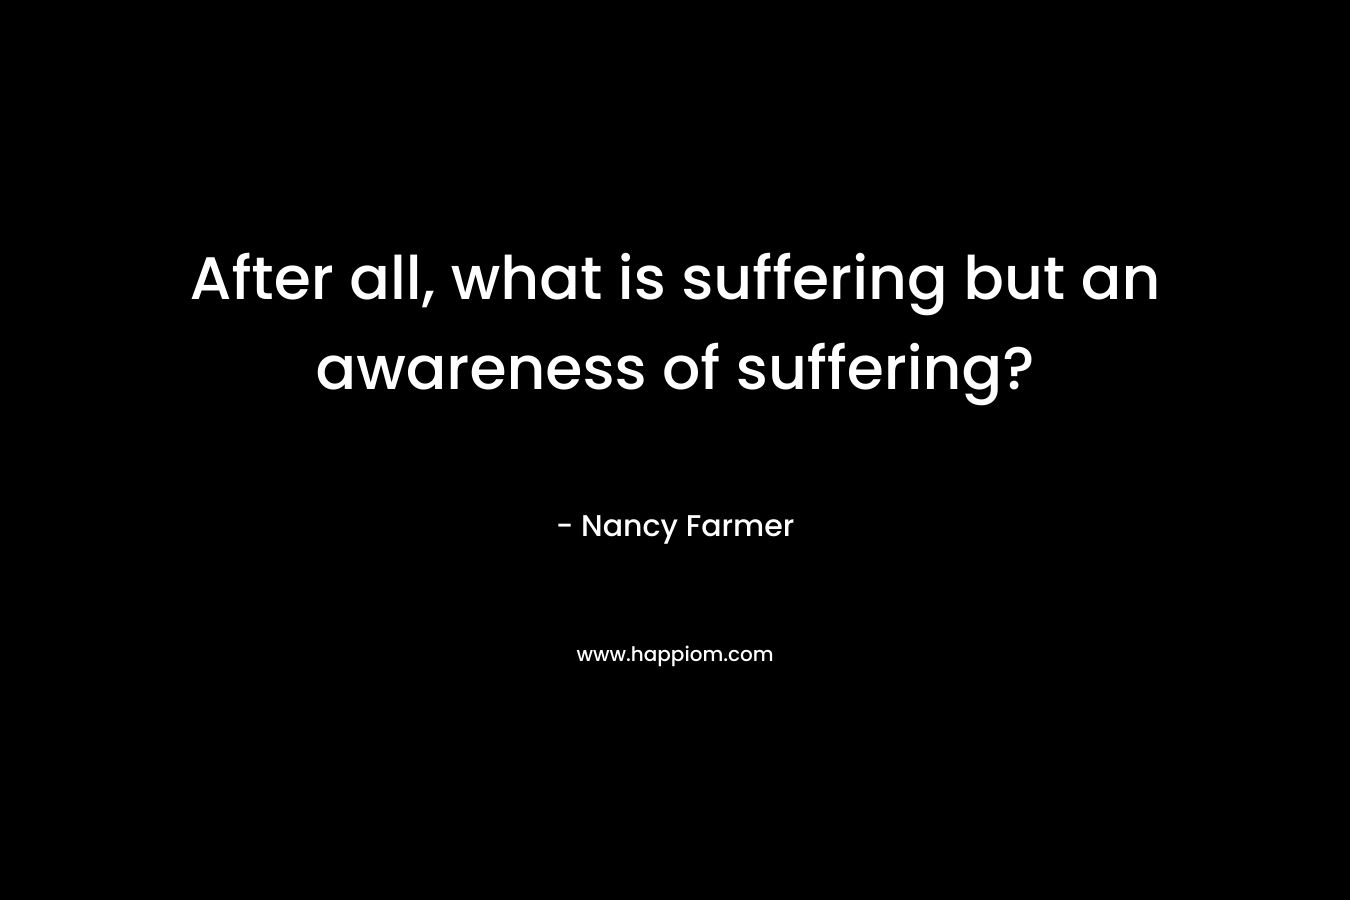 After all, what is suffering but an awareness of suffering?